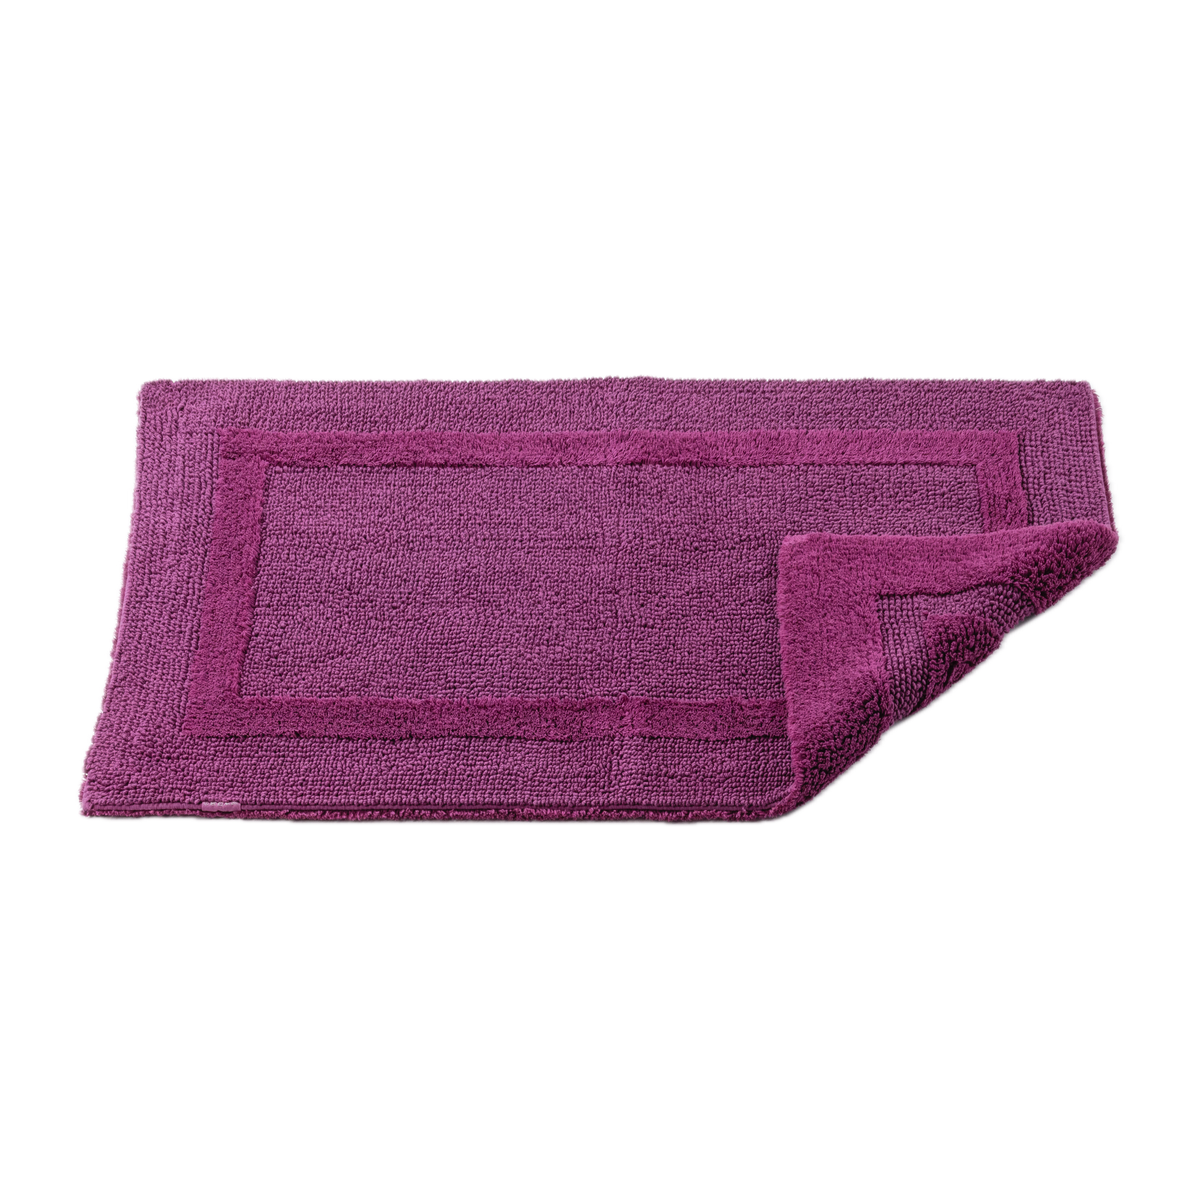 Abyss Habidecor Reversible Bath Rug in Baton Rouge Color with Corner Fold